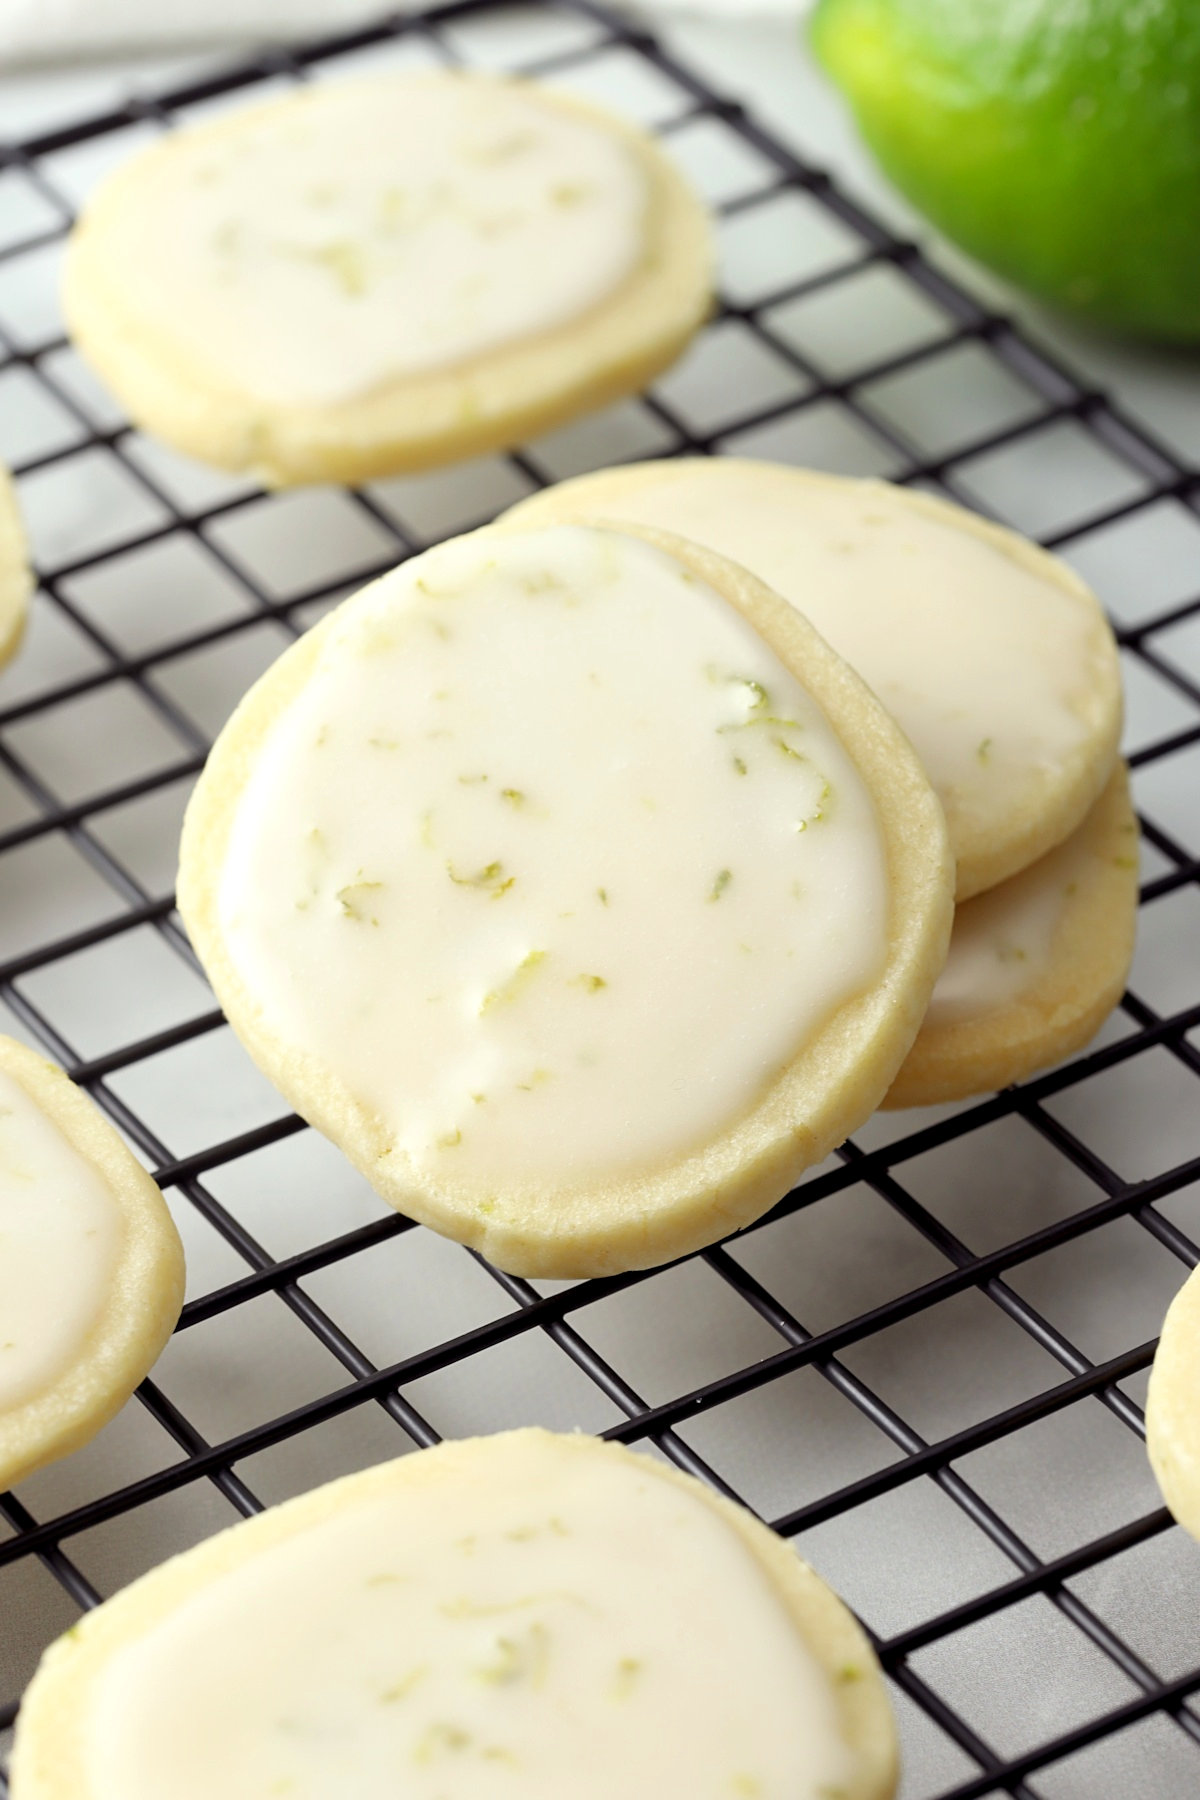 Lime zest in the icing of a cookie.